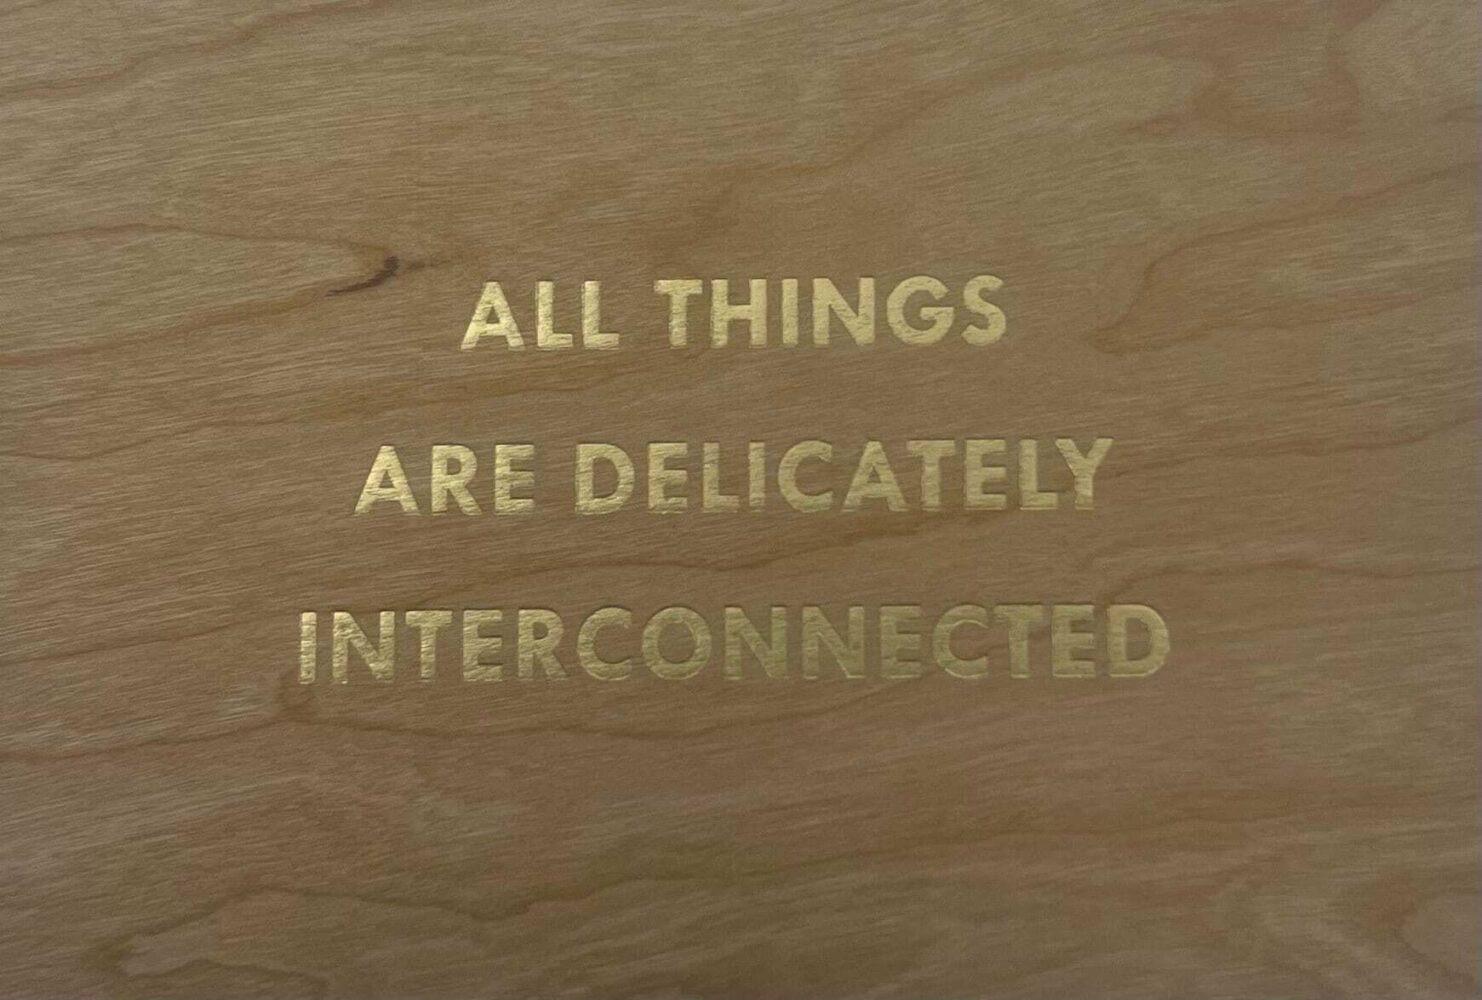 Jenny Holzer, All Things Are Delicately Connected – Gold (Truism Series) 

Screenprint on cherry wood

9 x 14 cm 

Limited edition from an unknown edition size 